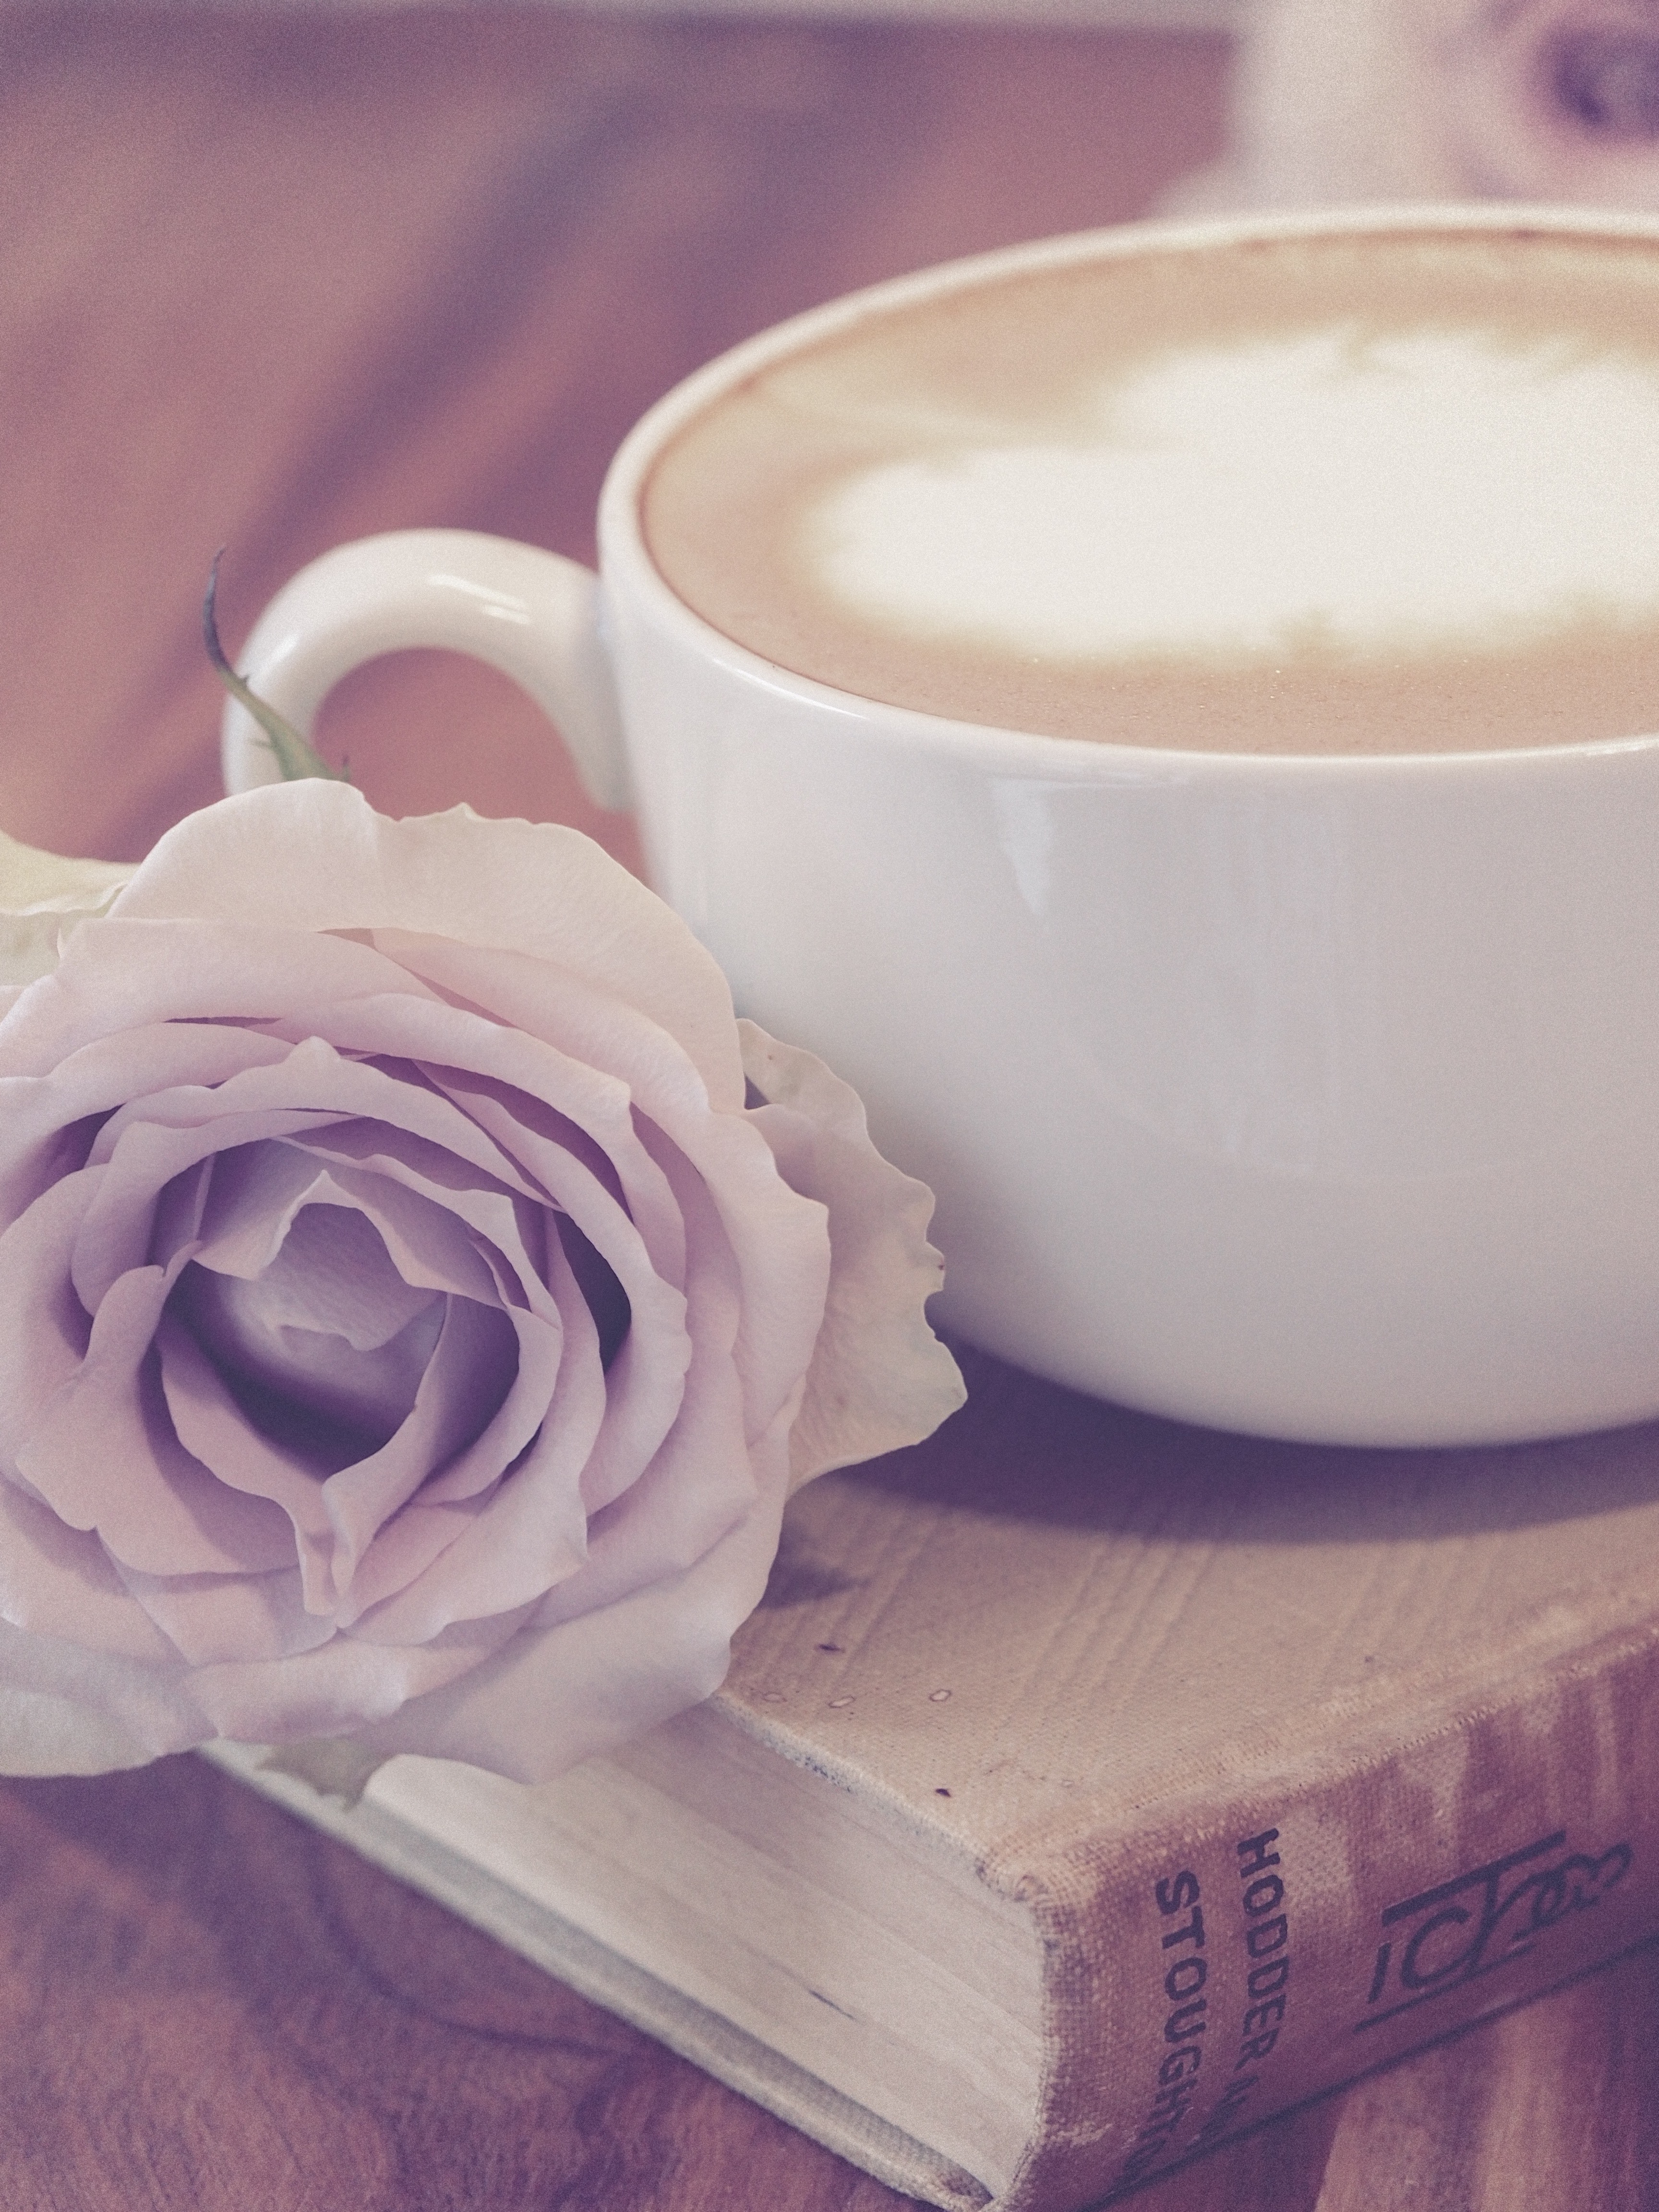 Photography of Flower Beside Coffee on Top of Book, Cream, Latte art, Latte, Hot, HQ Photo